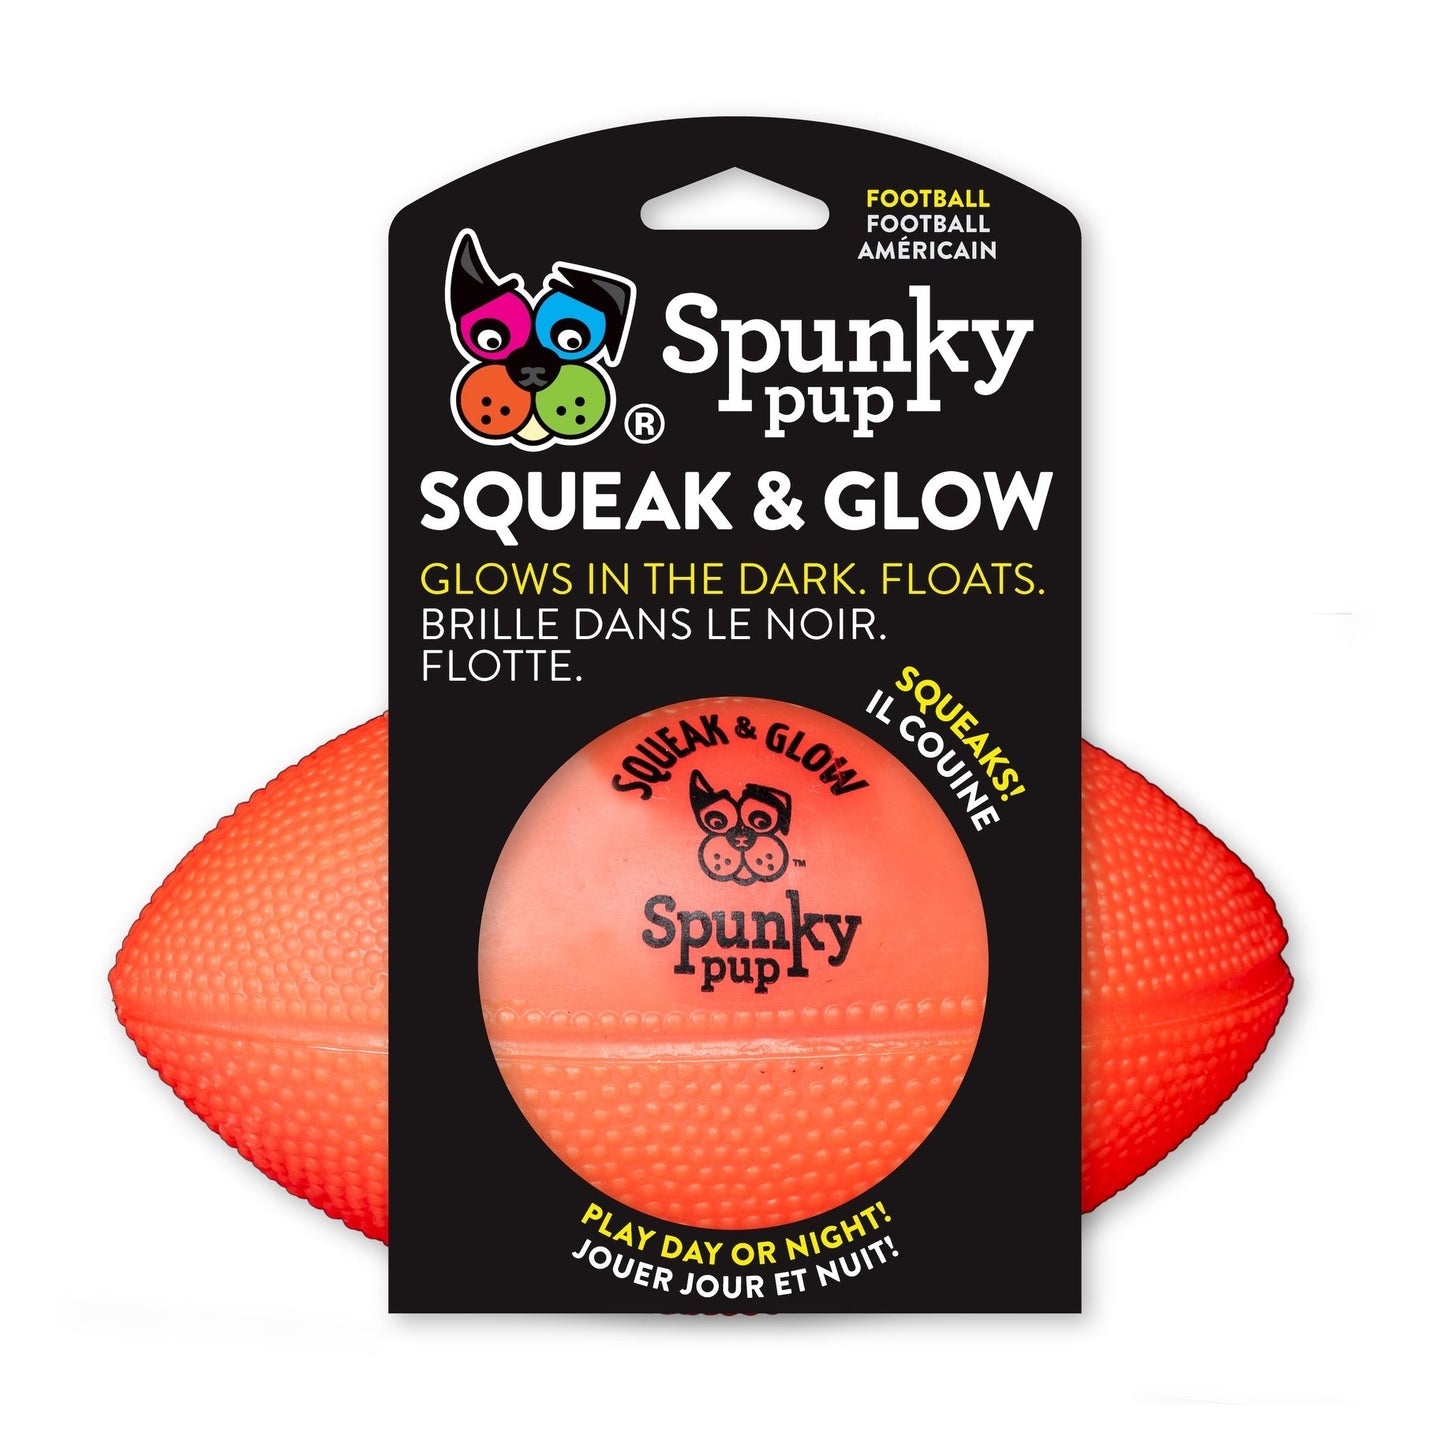 Squeak and Glow Football -Spunky Pup - Bulletproof Pet Products Inc